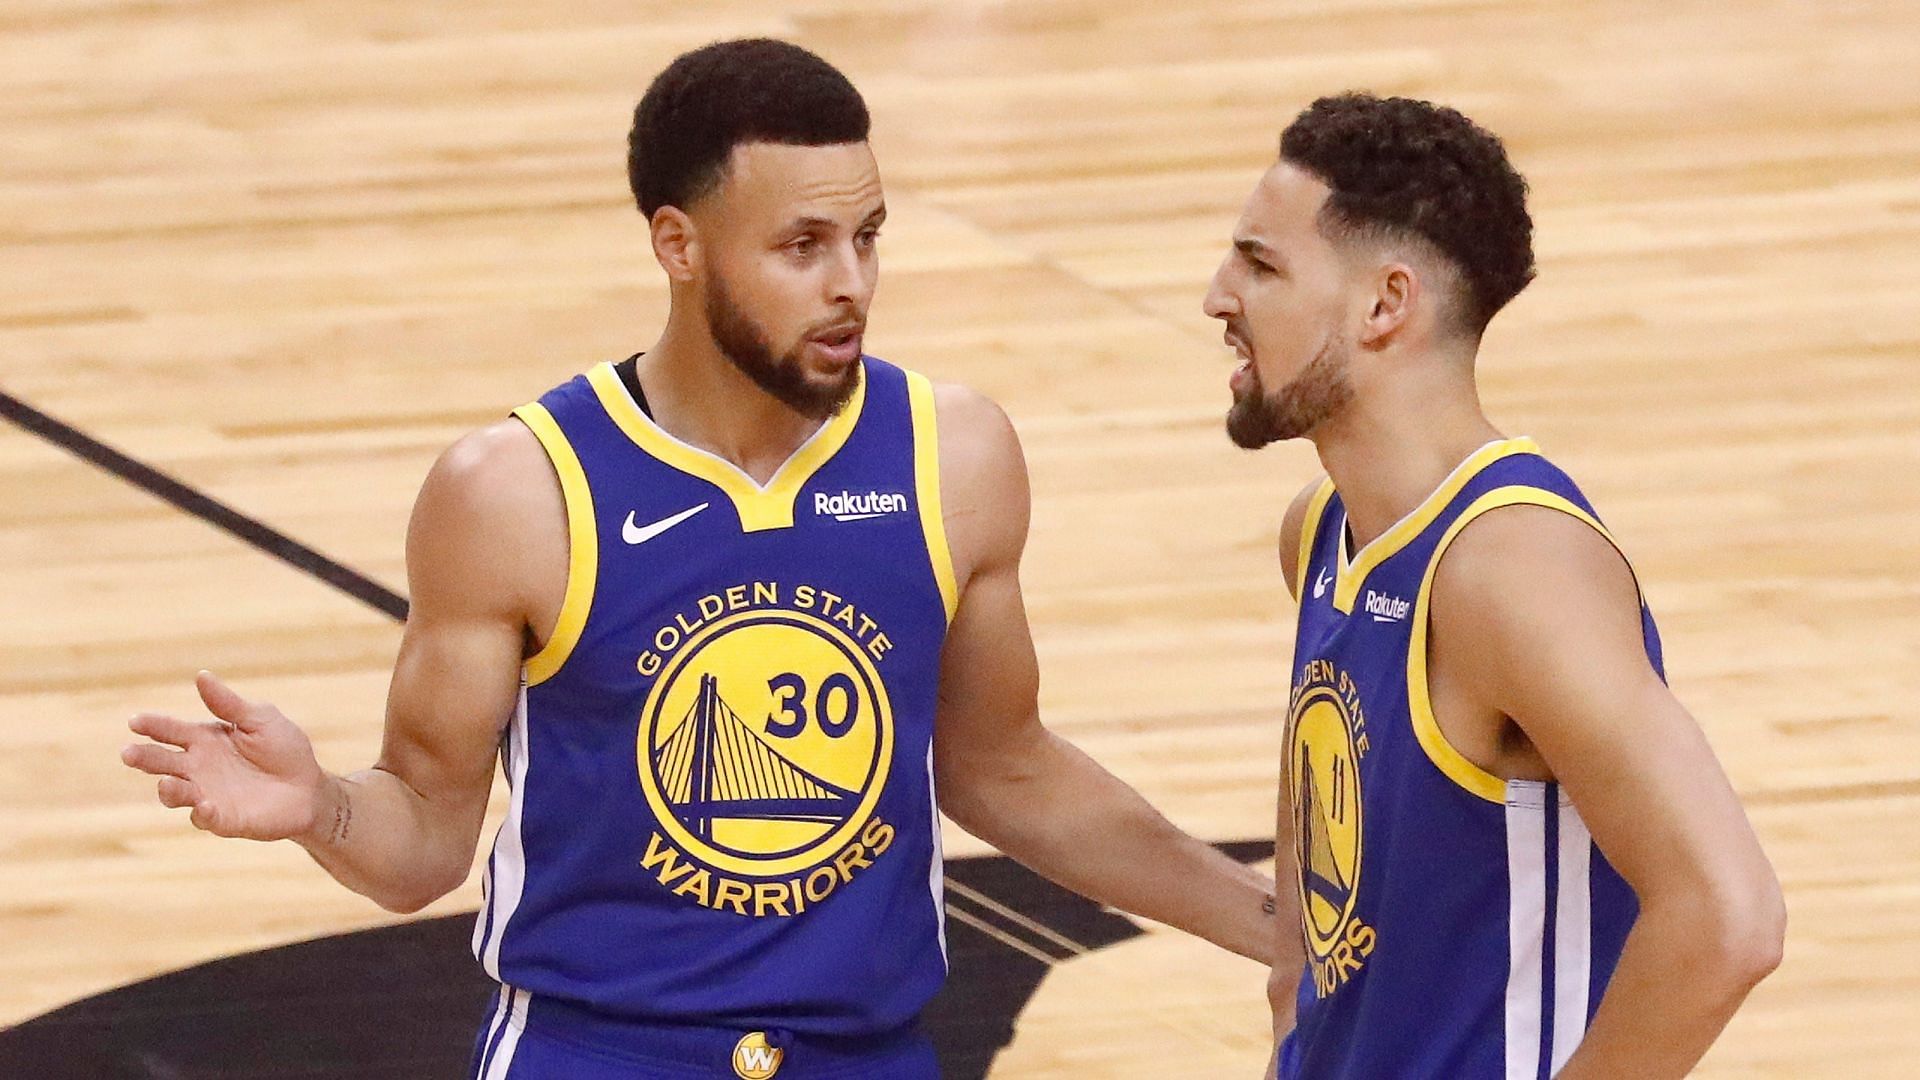 Range Talk Episode 1: Stephen Curry  The joy you bring sets the team's  culture so “just smile” 